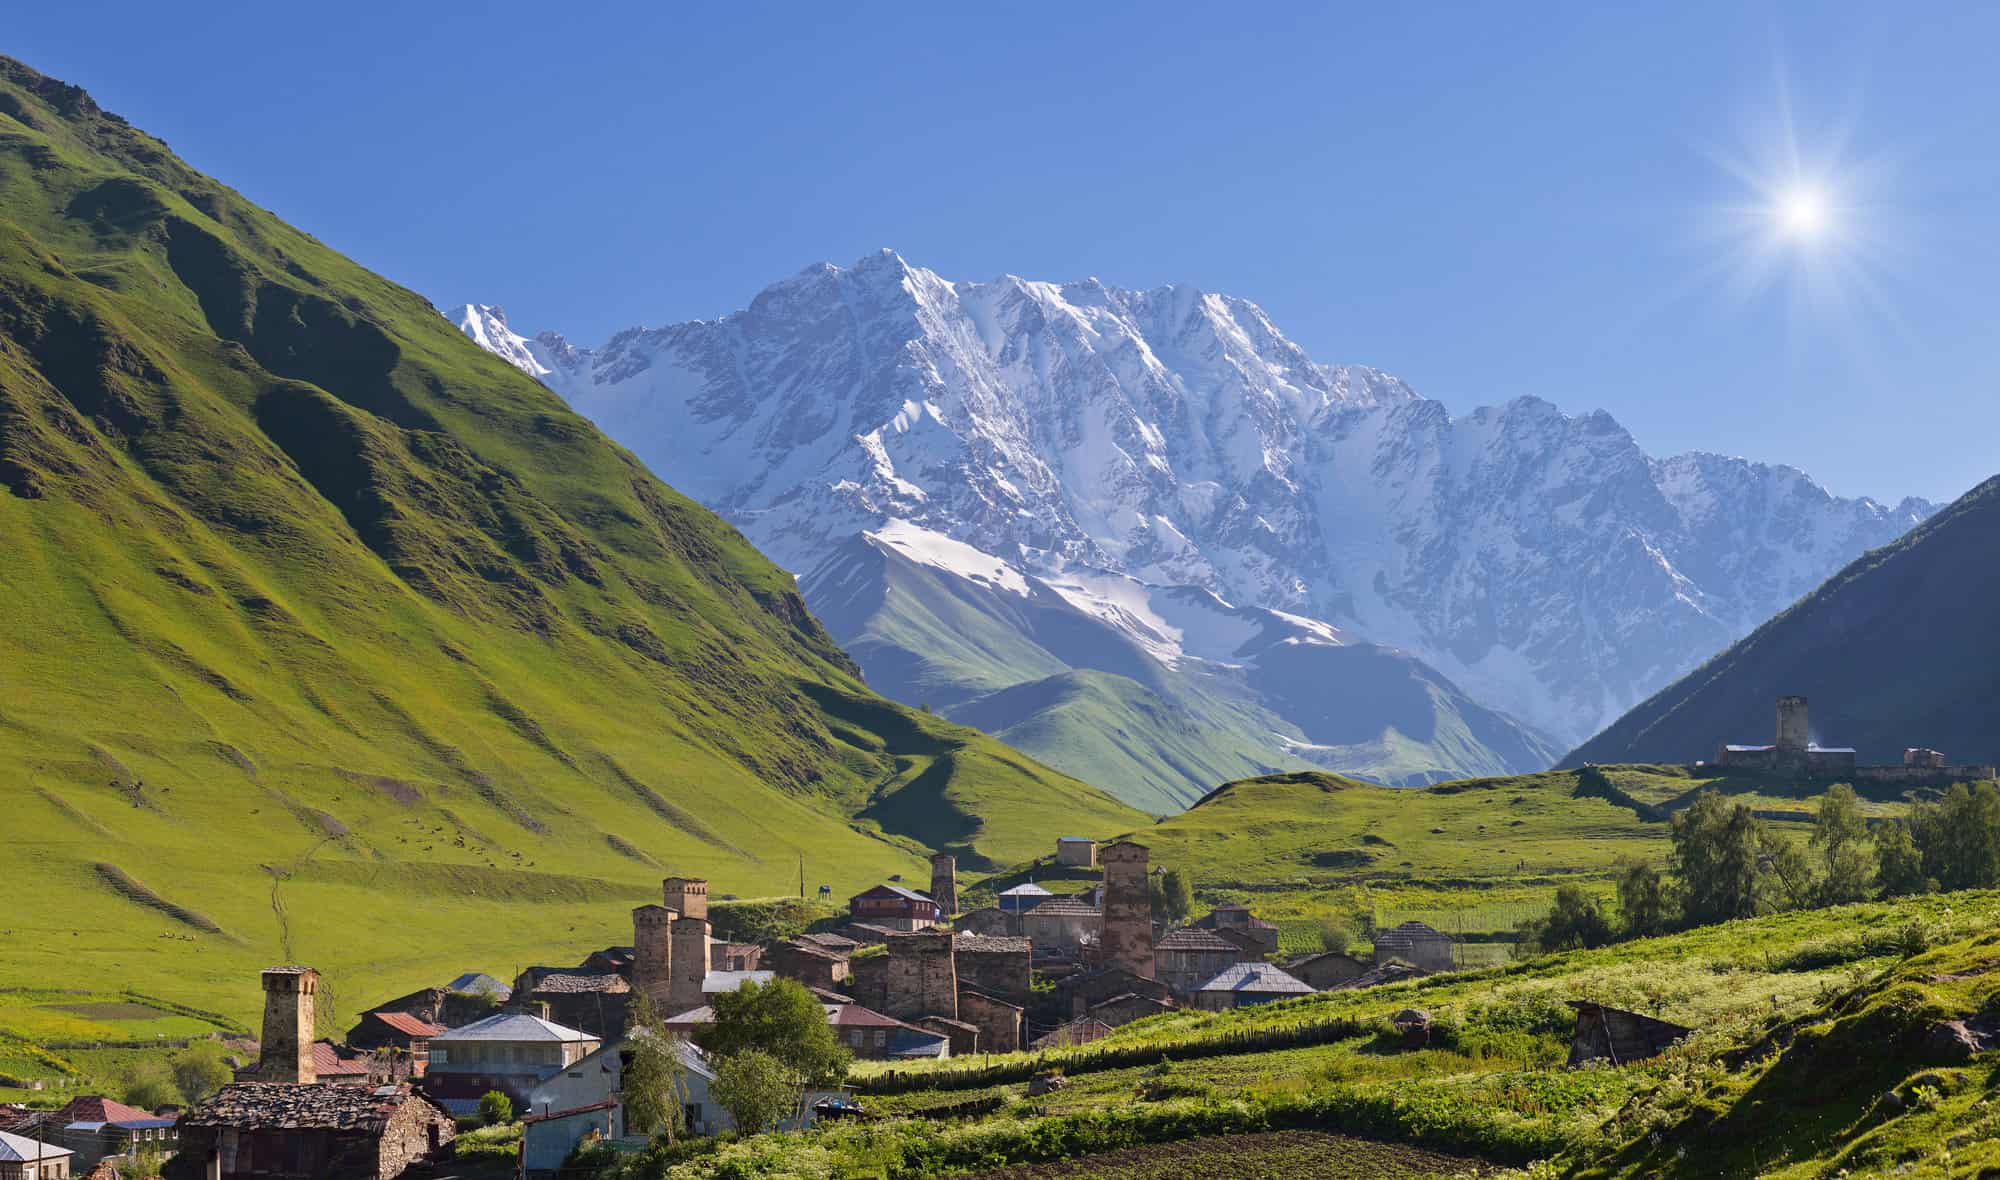 <p>A side trip to Kazbegi took me deeper into the soaring Caucasus peaks, where views stretch forever. And with culinary treasures like khachapuri cheese bread and dark amber wines made in clay vessels, Georgia tantalized all my senses.</p>